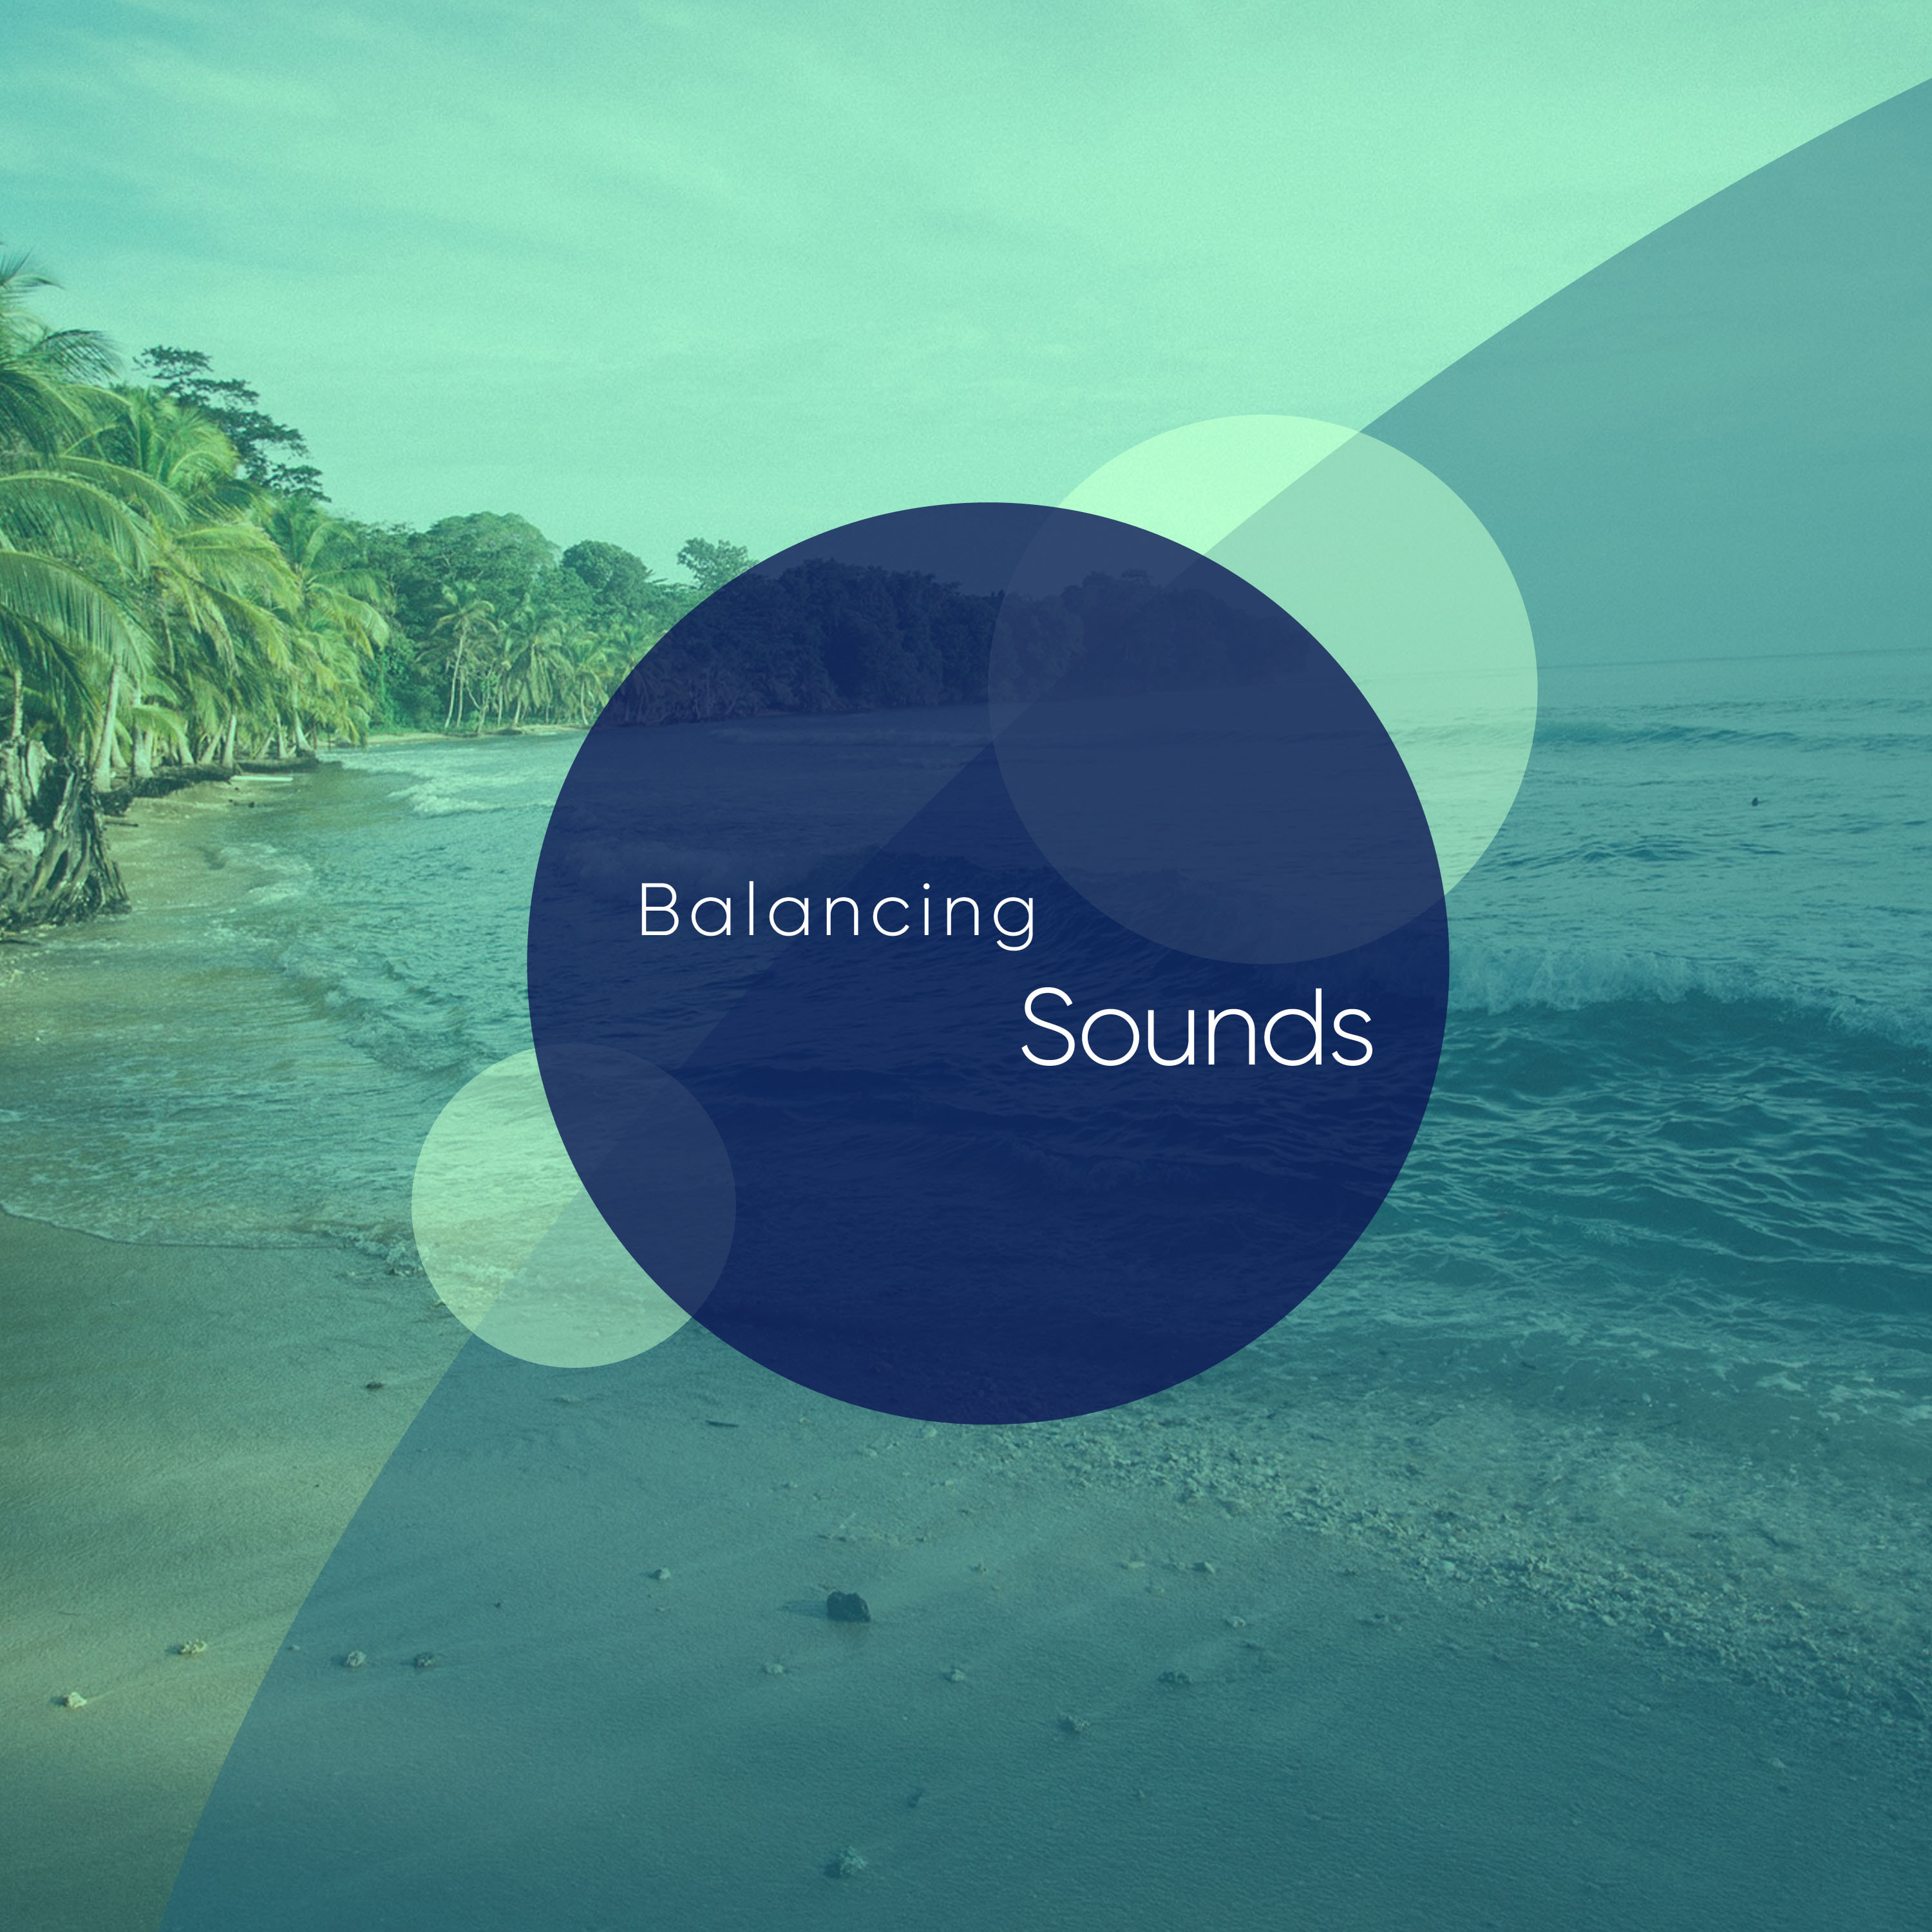 Balancing Sounds for Curing Insomnia